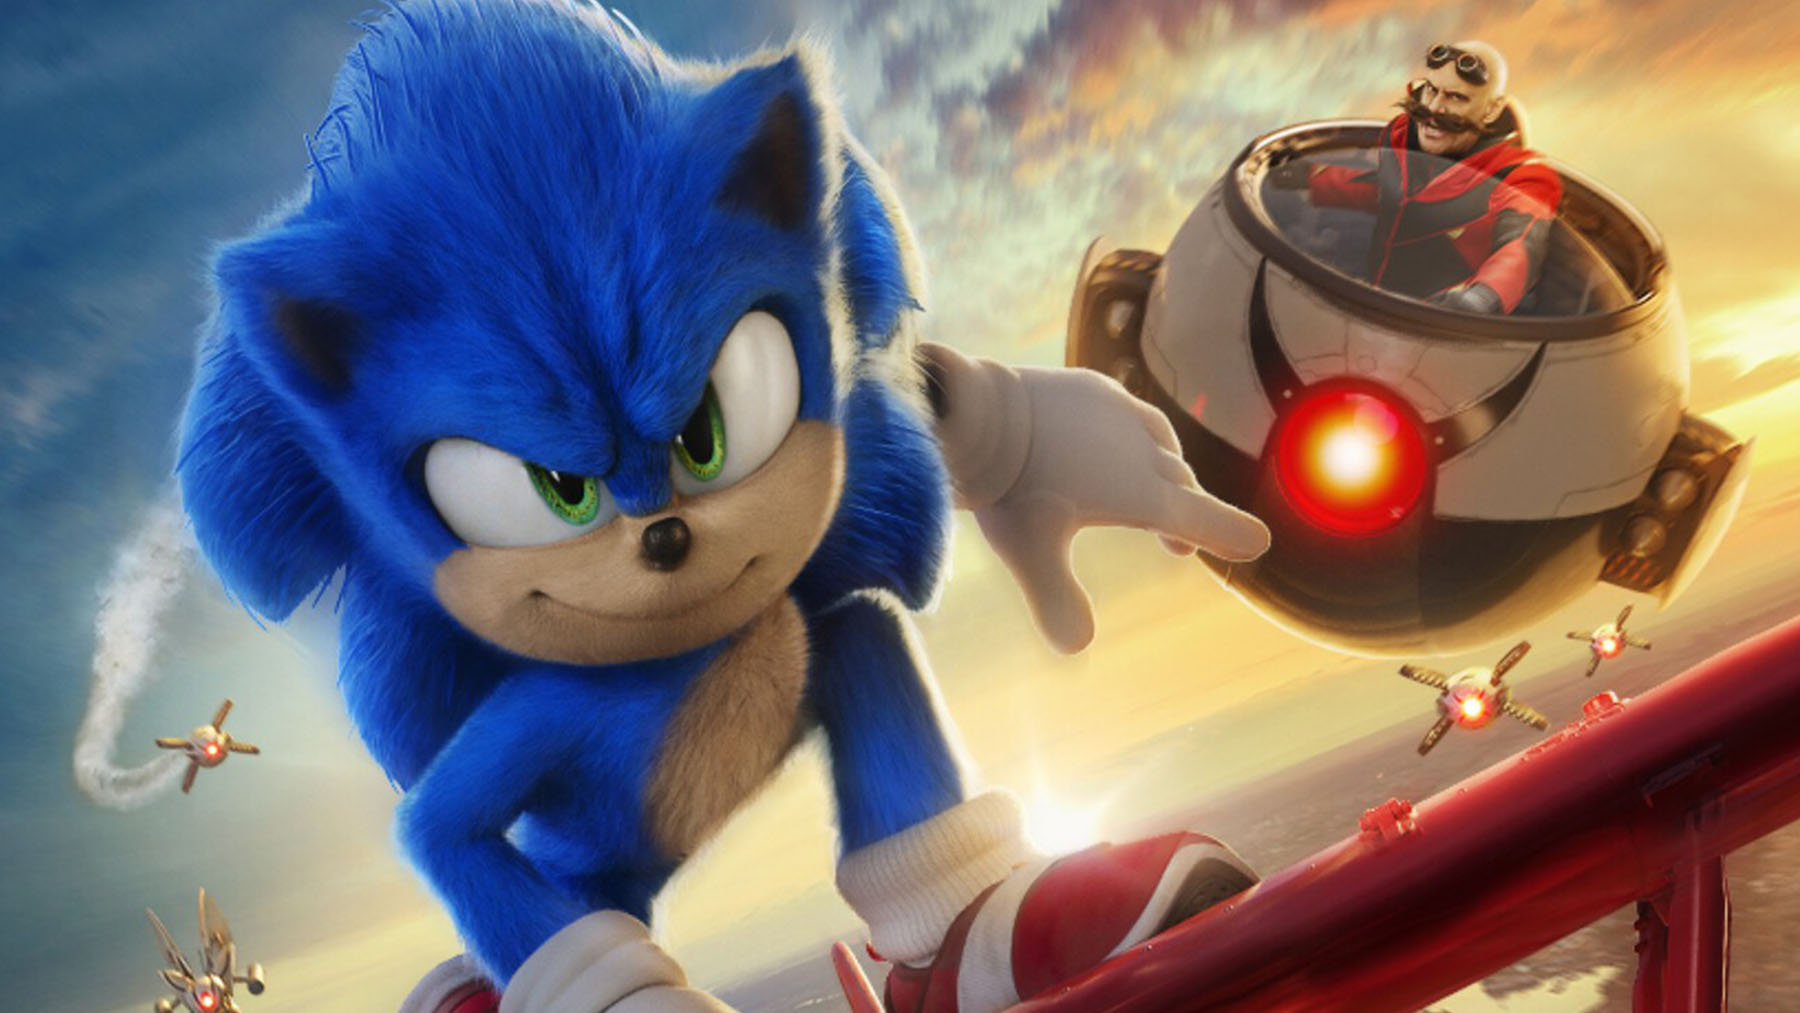 ‘Sonic 2’ (Paramount Pictures)